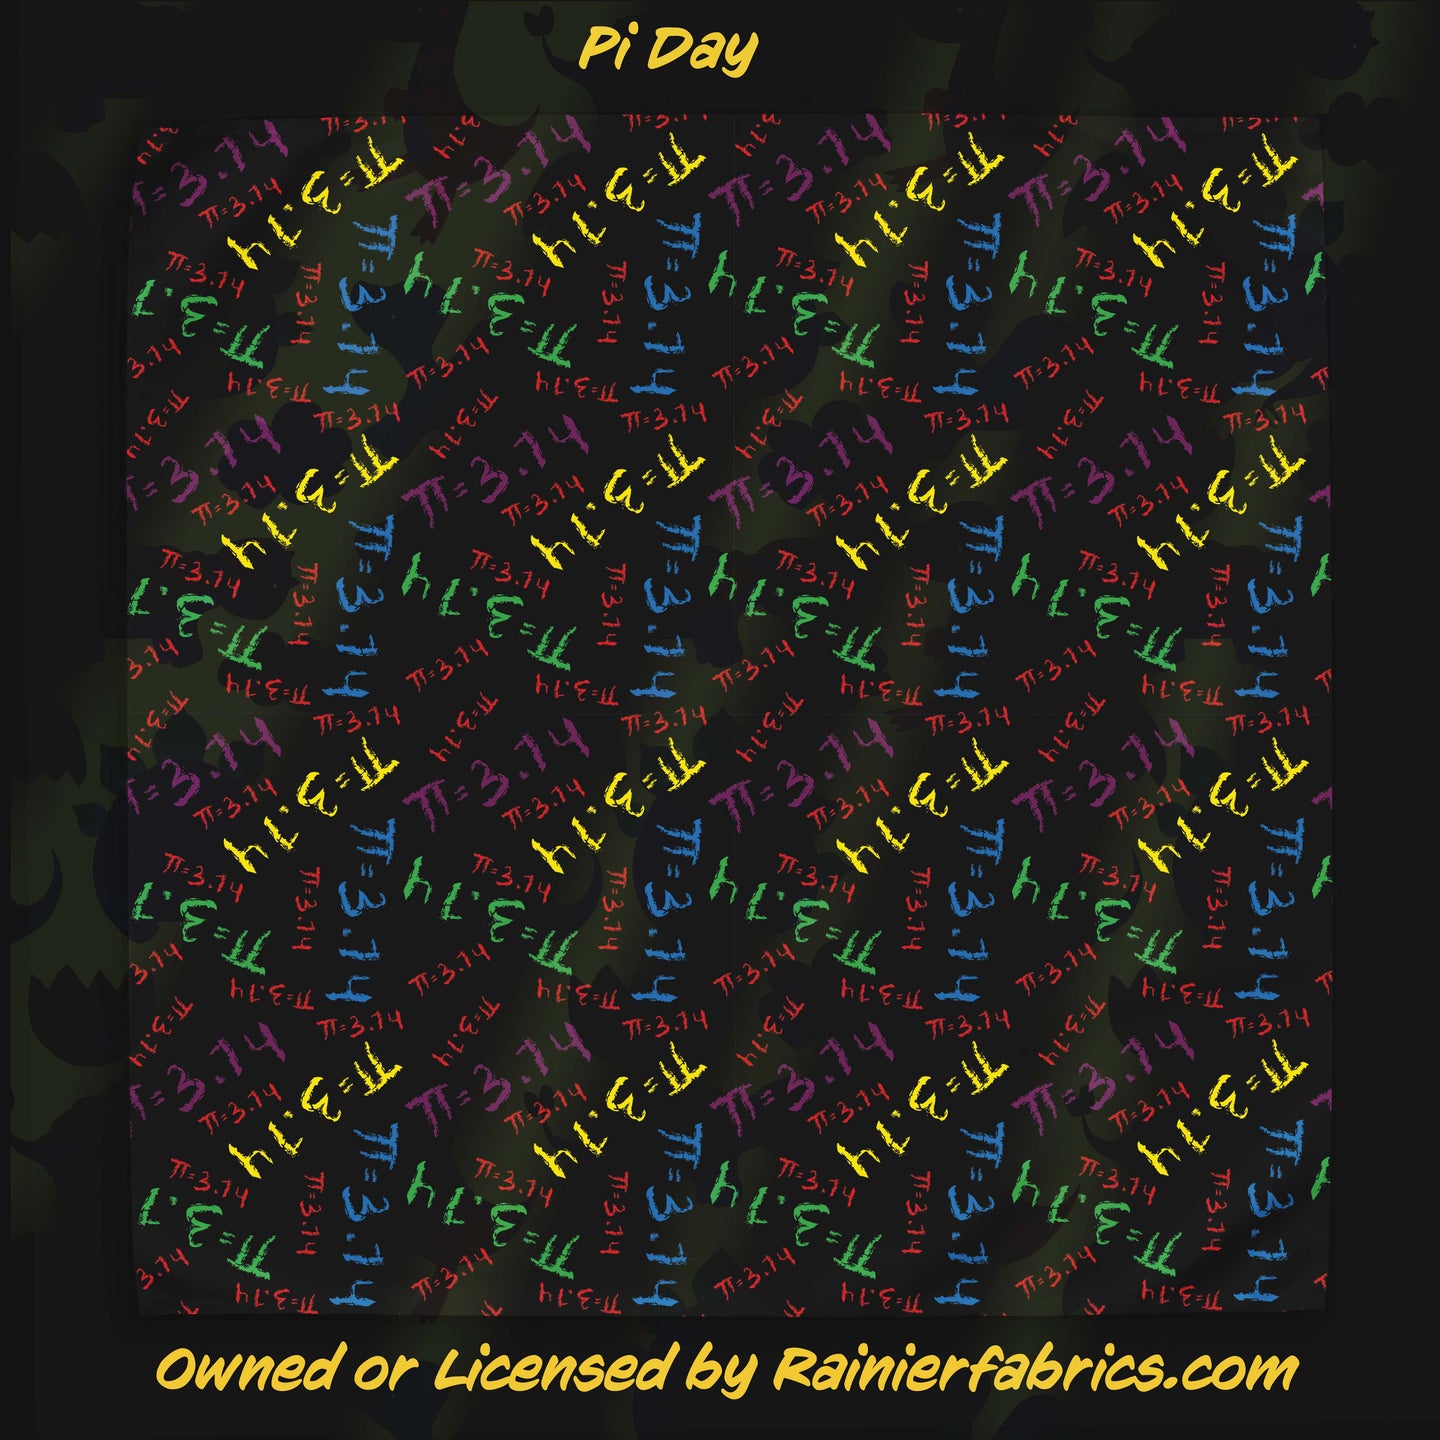 Pi Day - 2-5 day turnaround - Order by 1/2 yard; Description of bases below